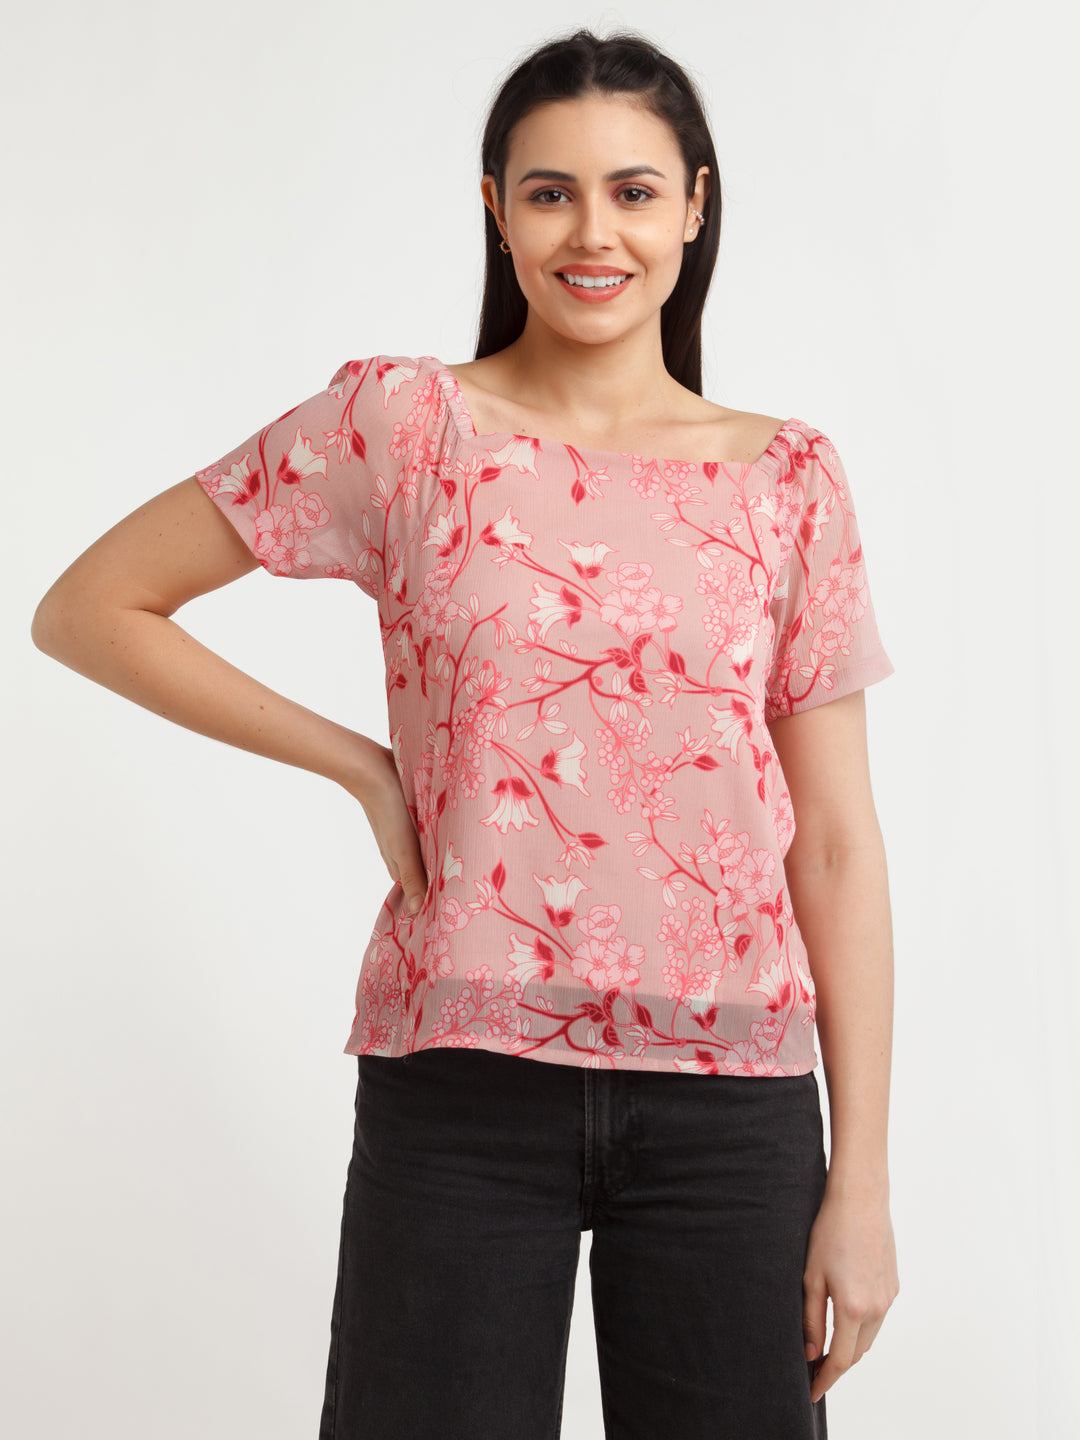 Pink Floral Top For Women